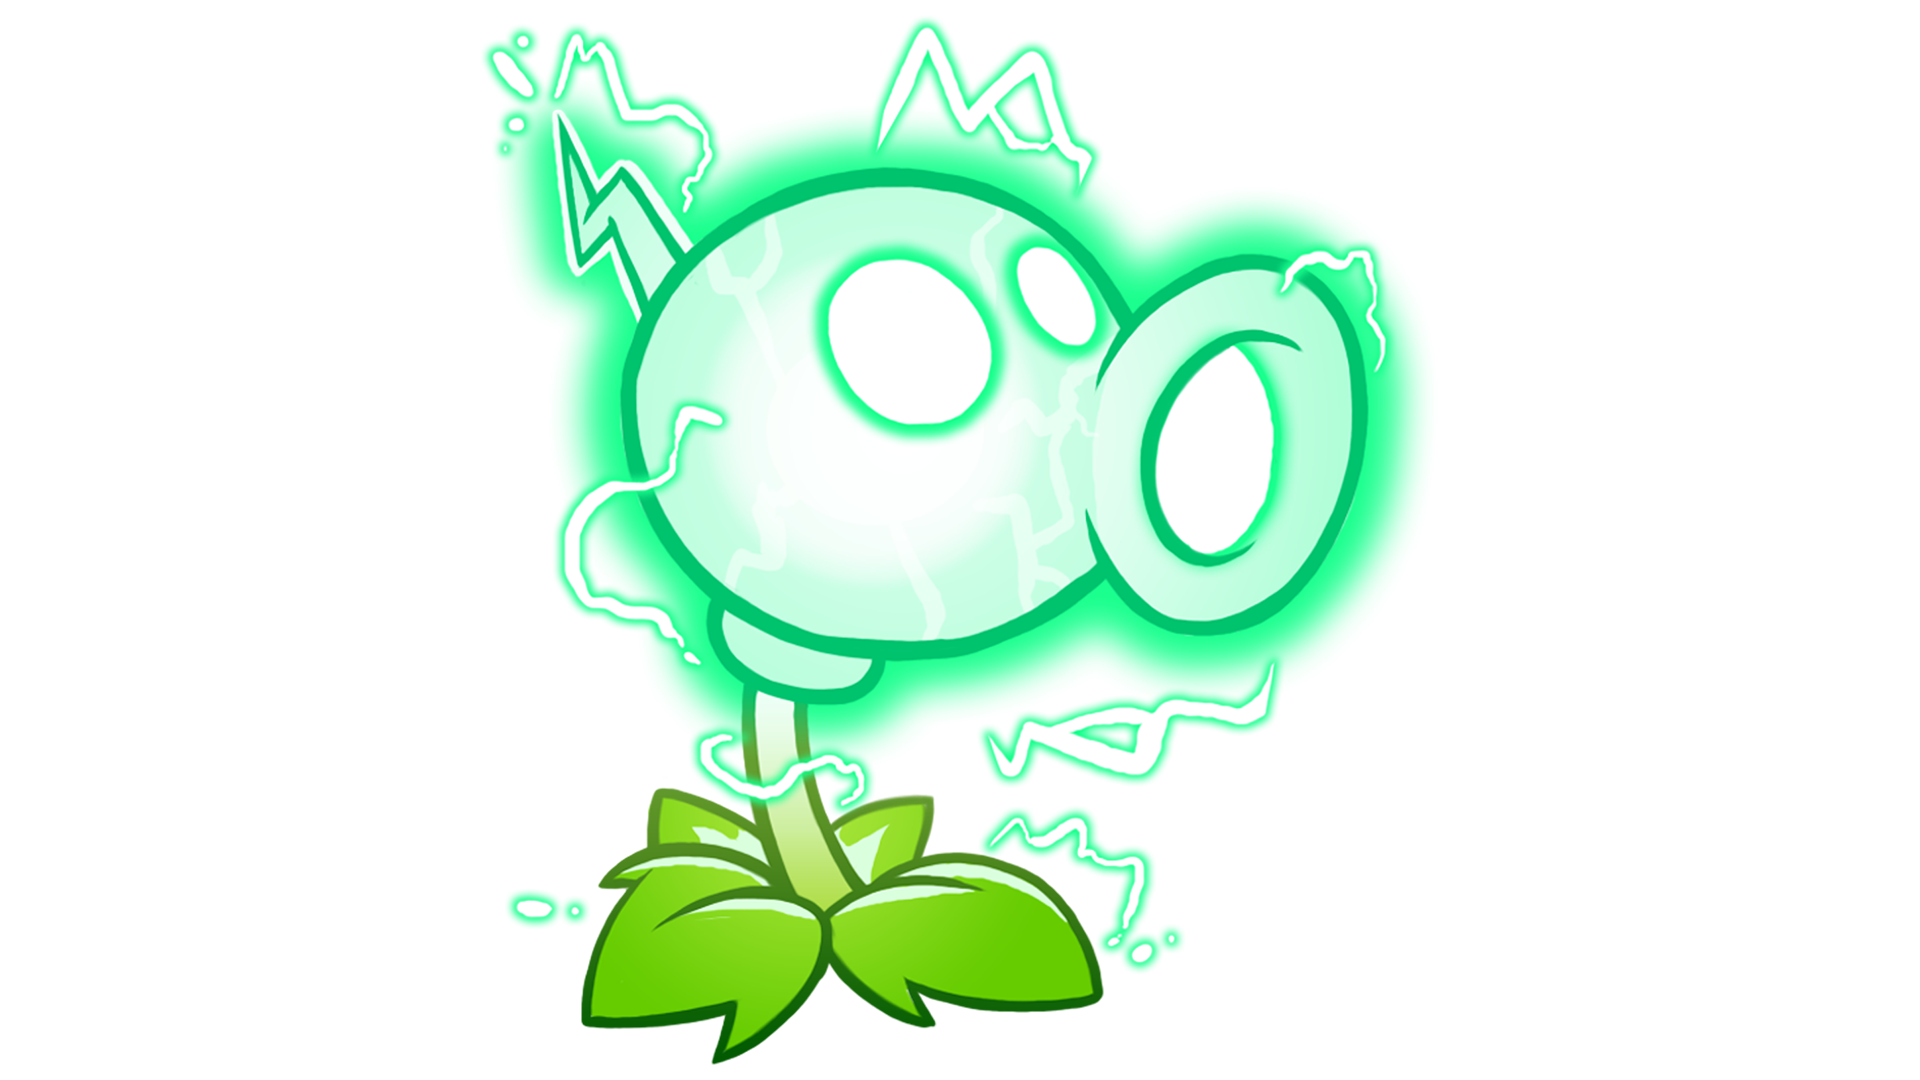 Electric Peashooter Bolts into PvZ2.